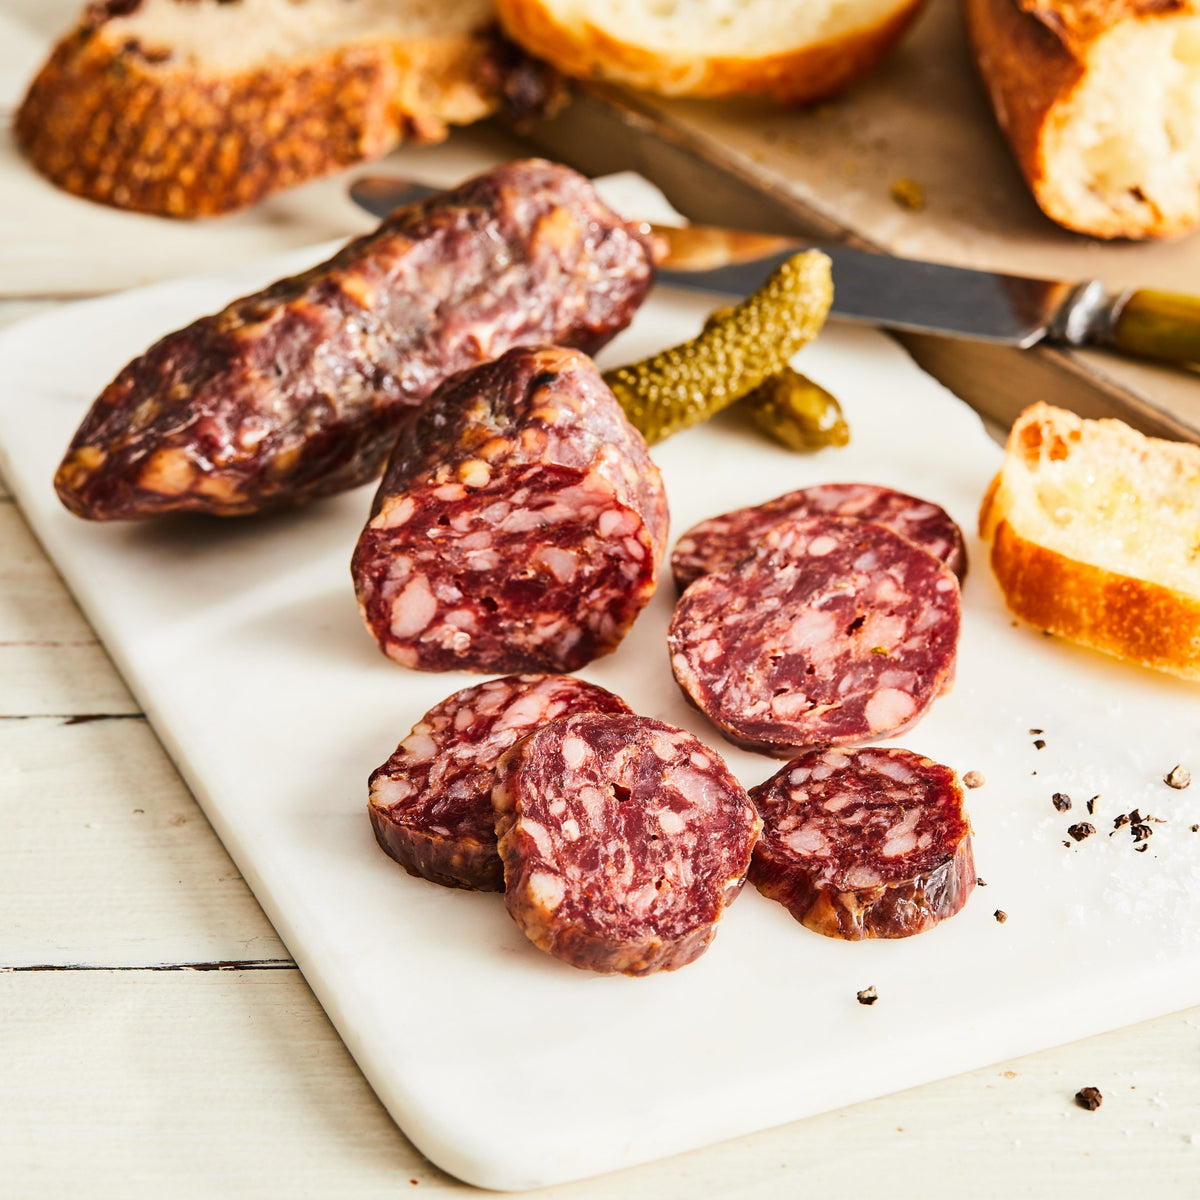 Image of Lamb Sujuk (No Pork). 1 Link, 3oz. a lamb salami with warm Middle Eastern spices